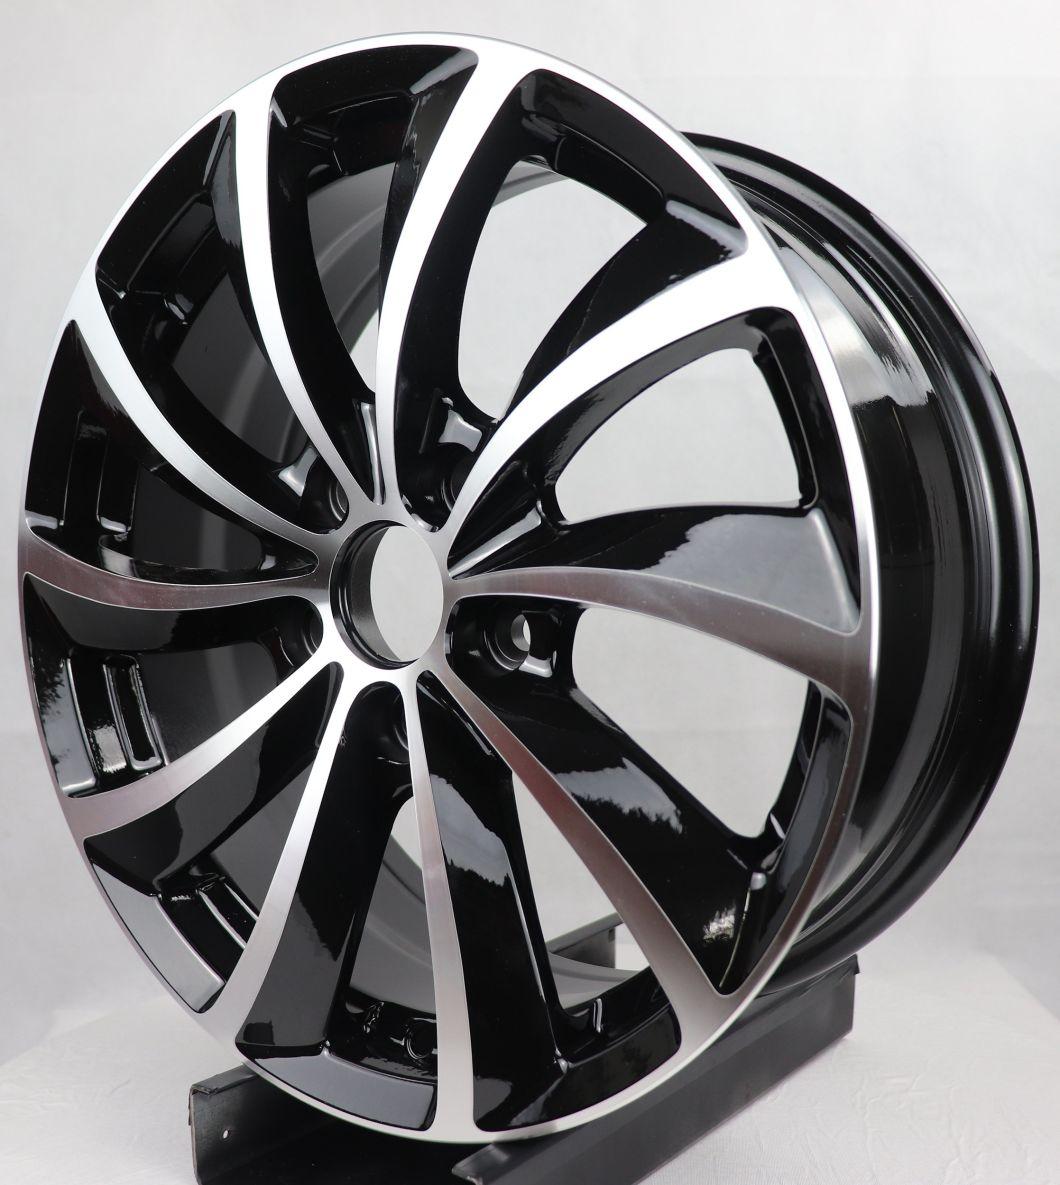 Popular Style Car Rims to Customize 14-16 Inch